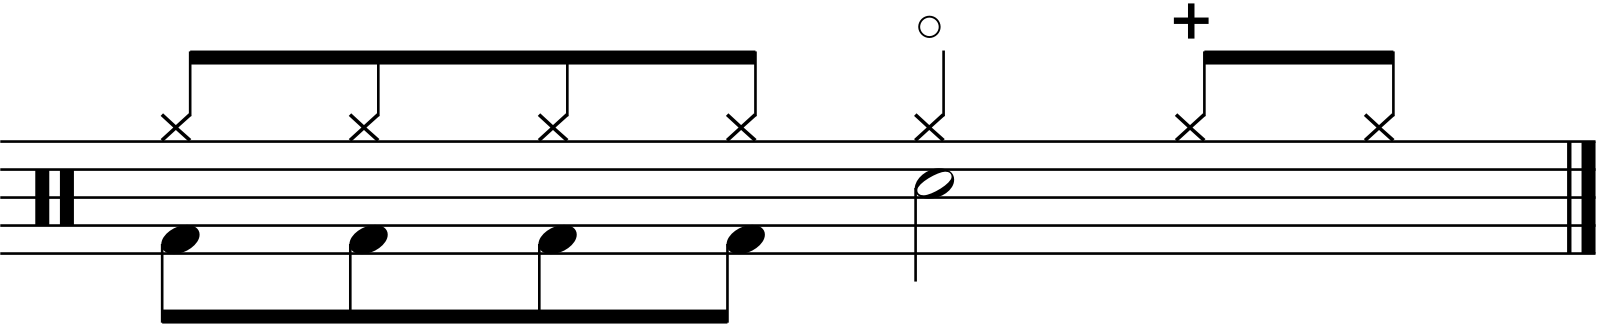 A variation on example 3.